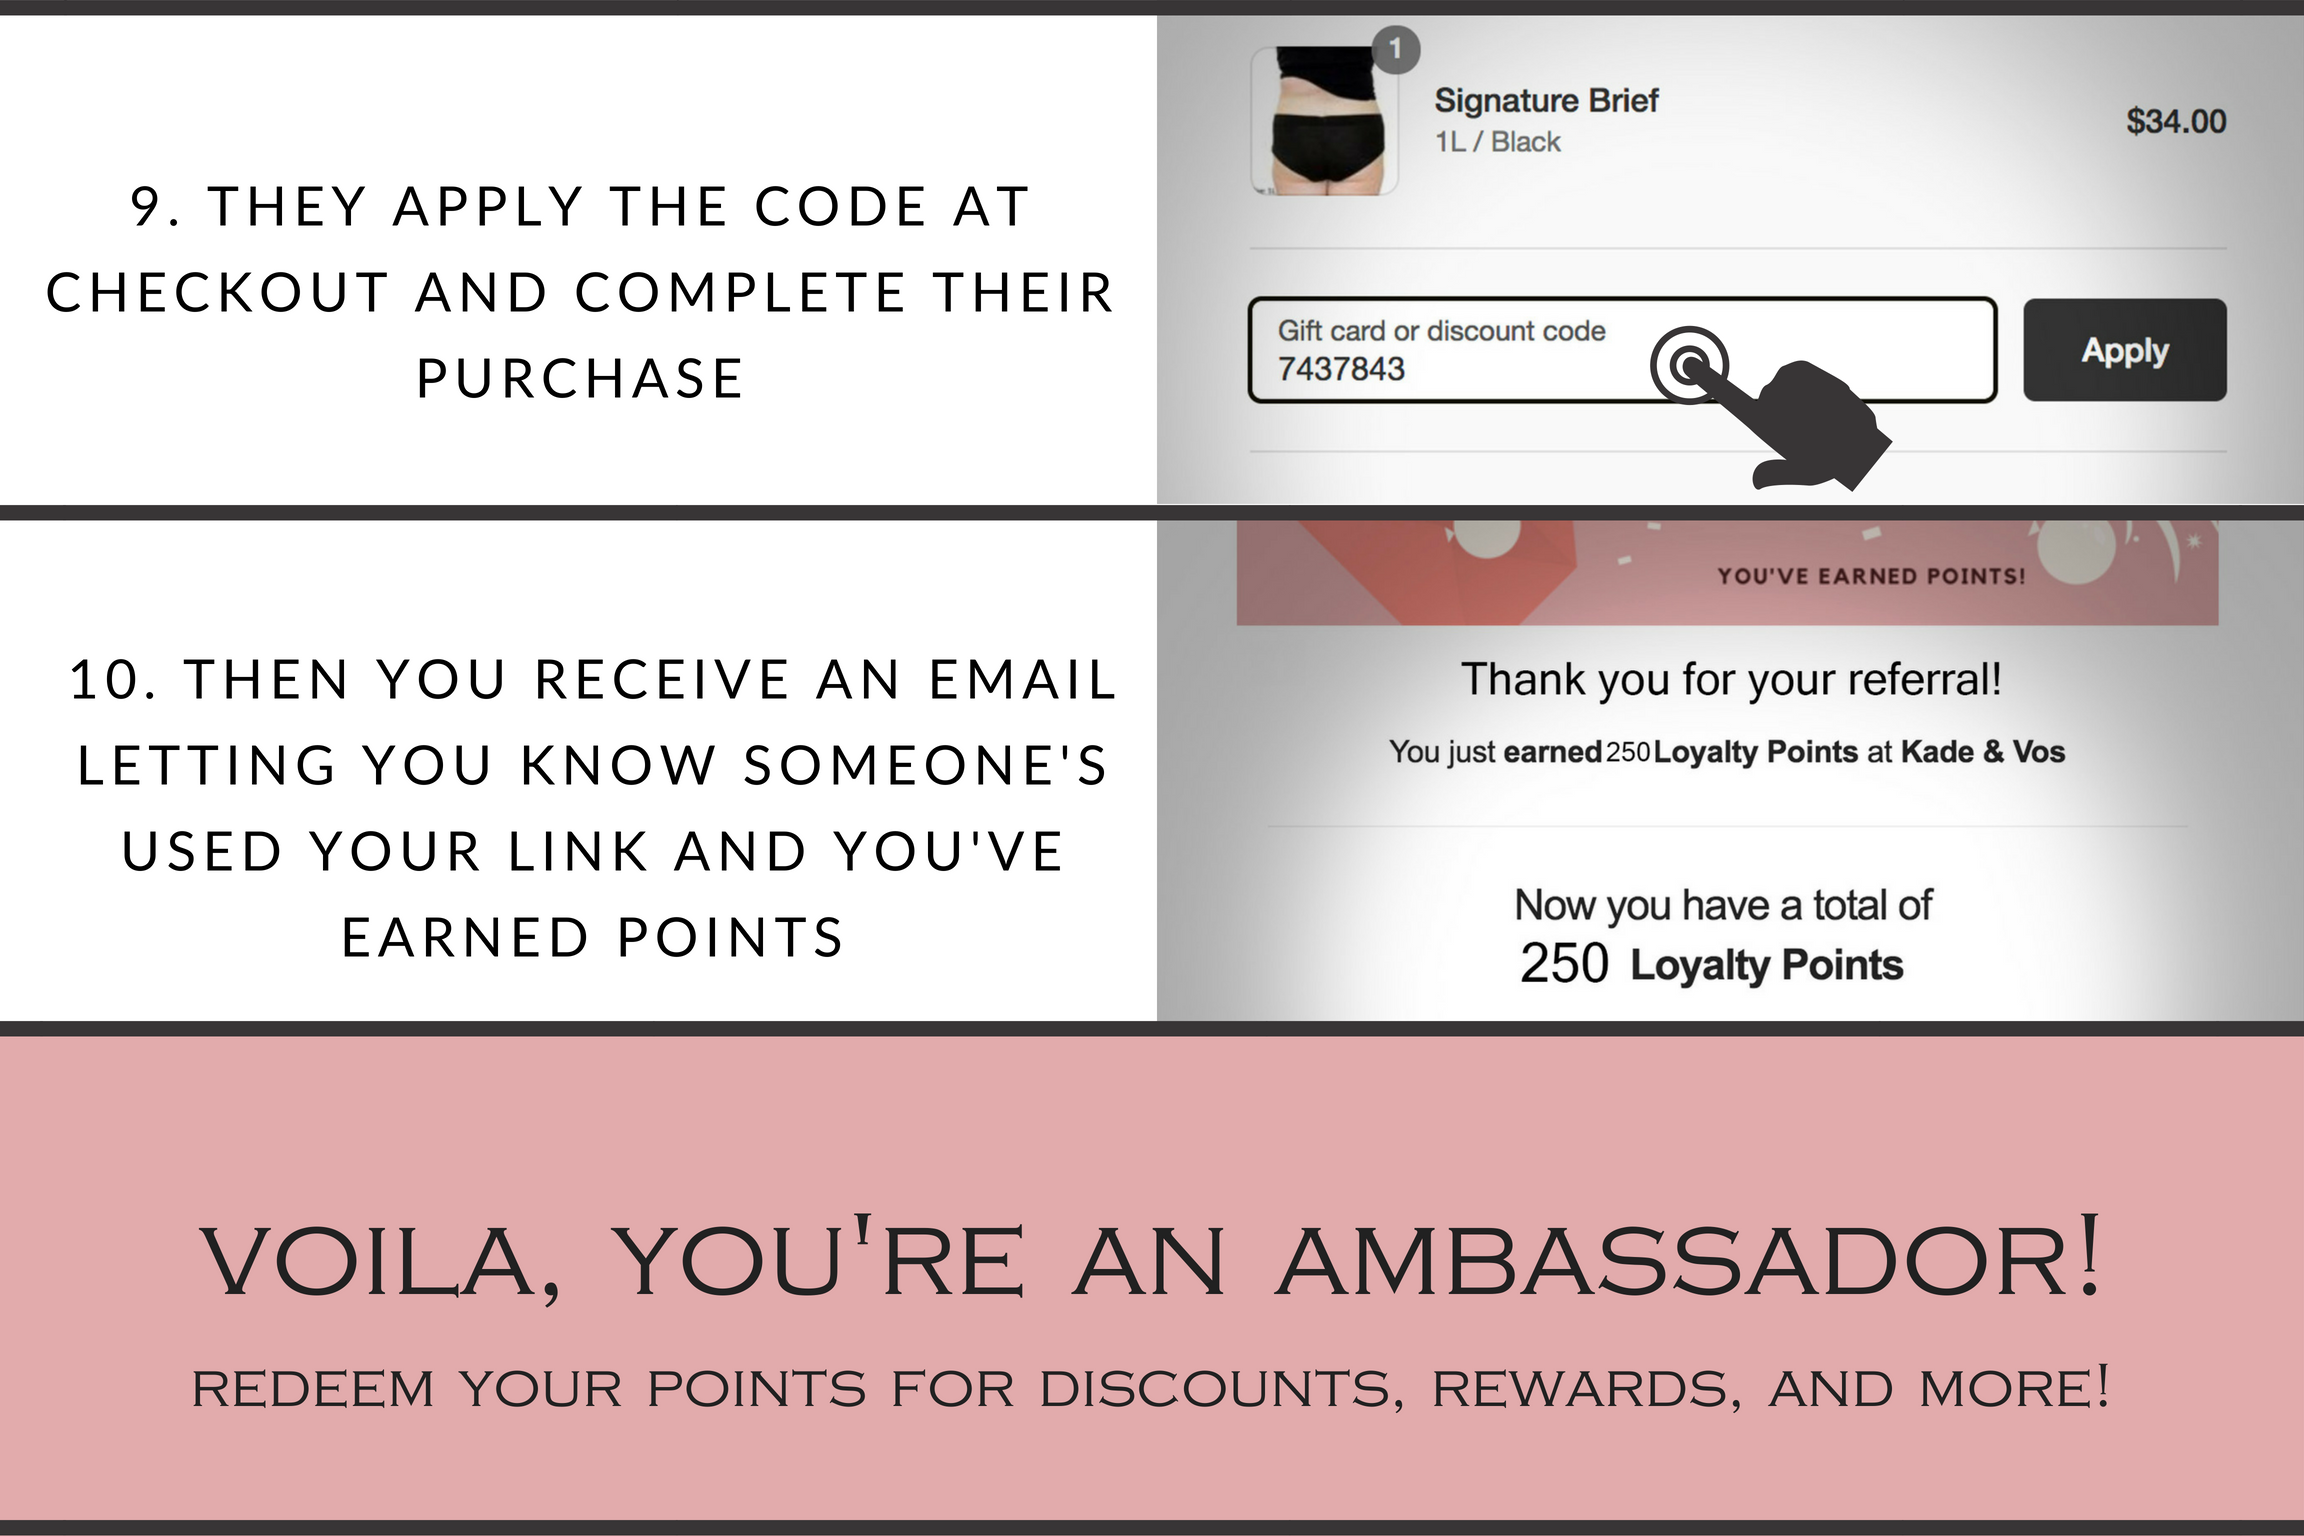 9. They apply the code at checkout and complete their purchase 10. then you receive an email letting you know someone used your link and you've earned points. Voila! You're an ambassador. Redeem your points for discounts, rewards, and more!